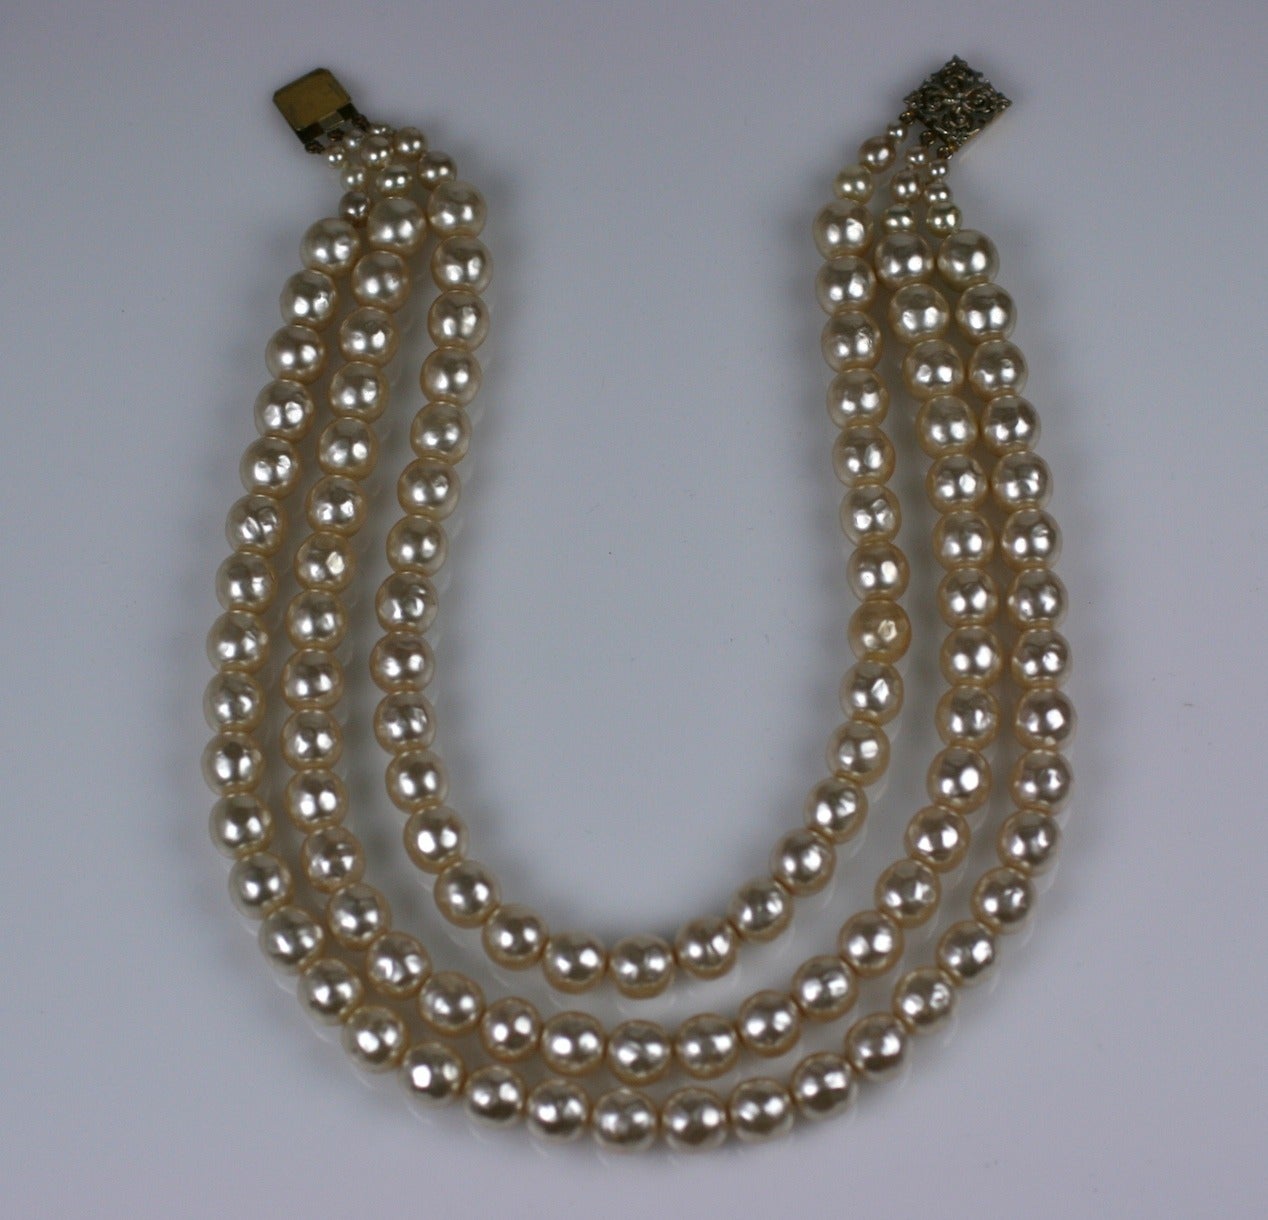 Elegant 3 strand glass pearl necklace by Louis Rousselet. Baroque and beautifully scaled cream graduated pearls which are handmade in the French tradition. Gilt filigree decorated clasp. Length 16